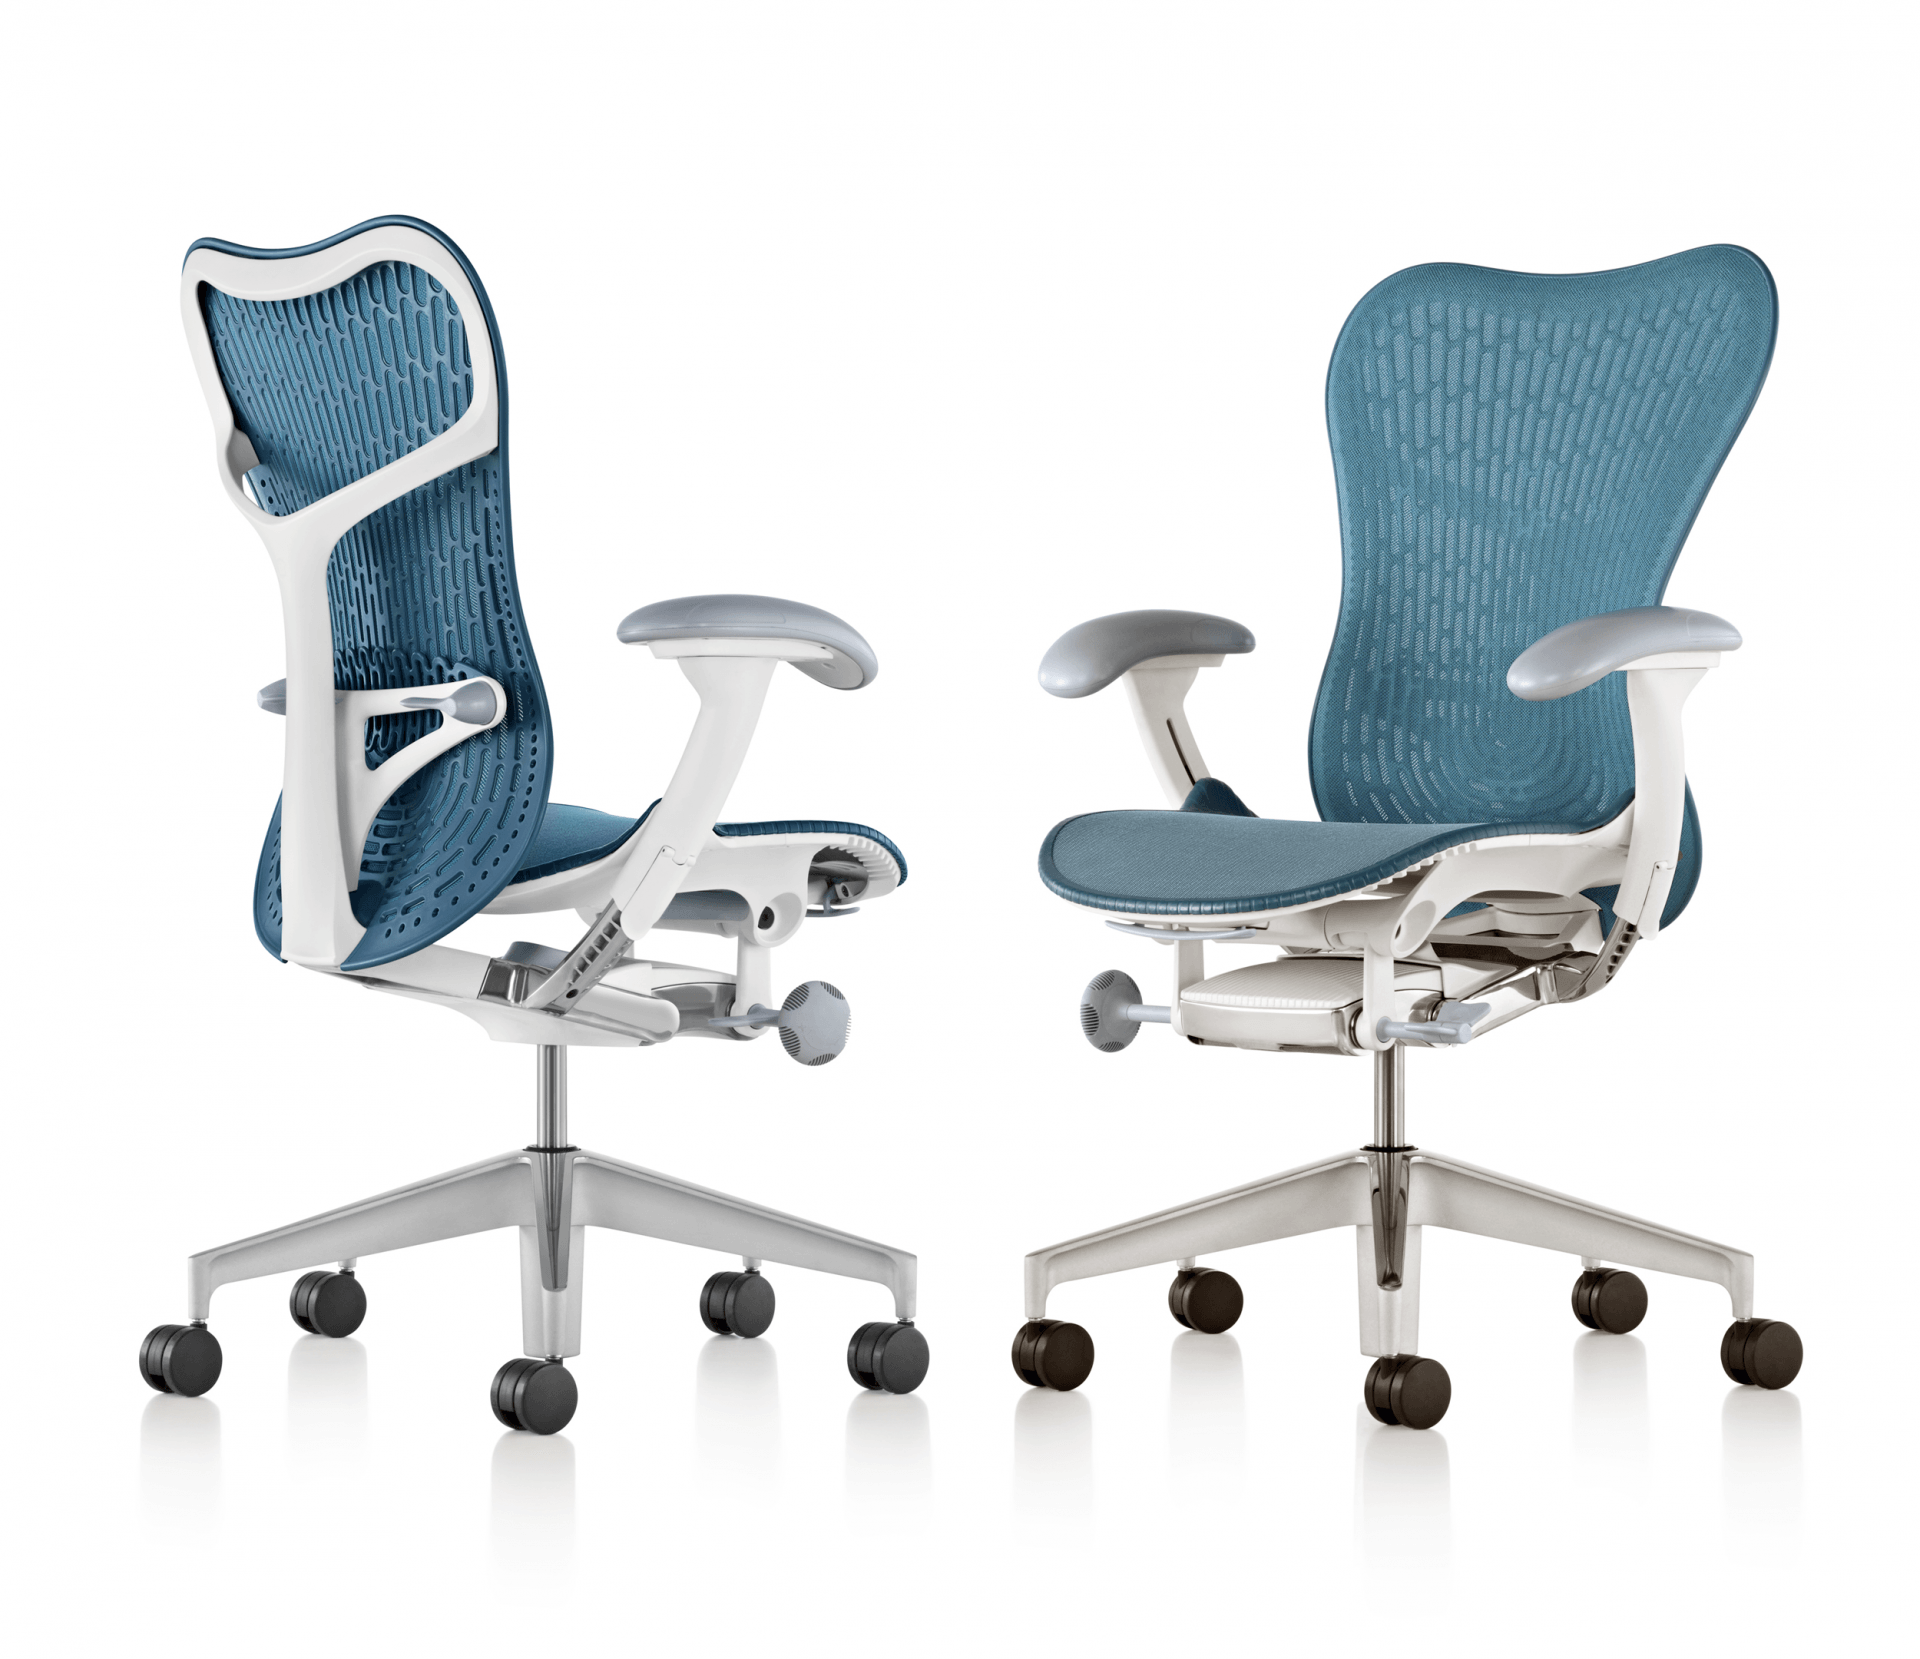 front and back views of the Mirra 2 chair by Herman Miller